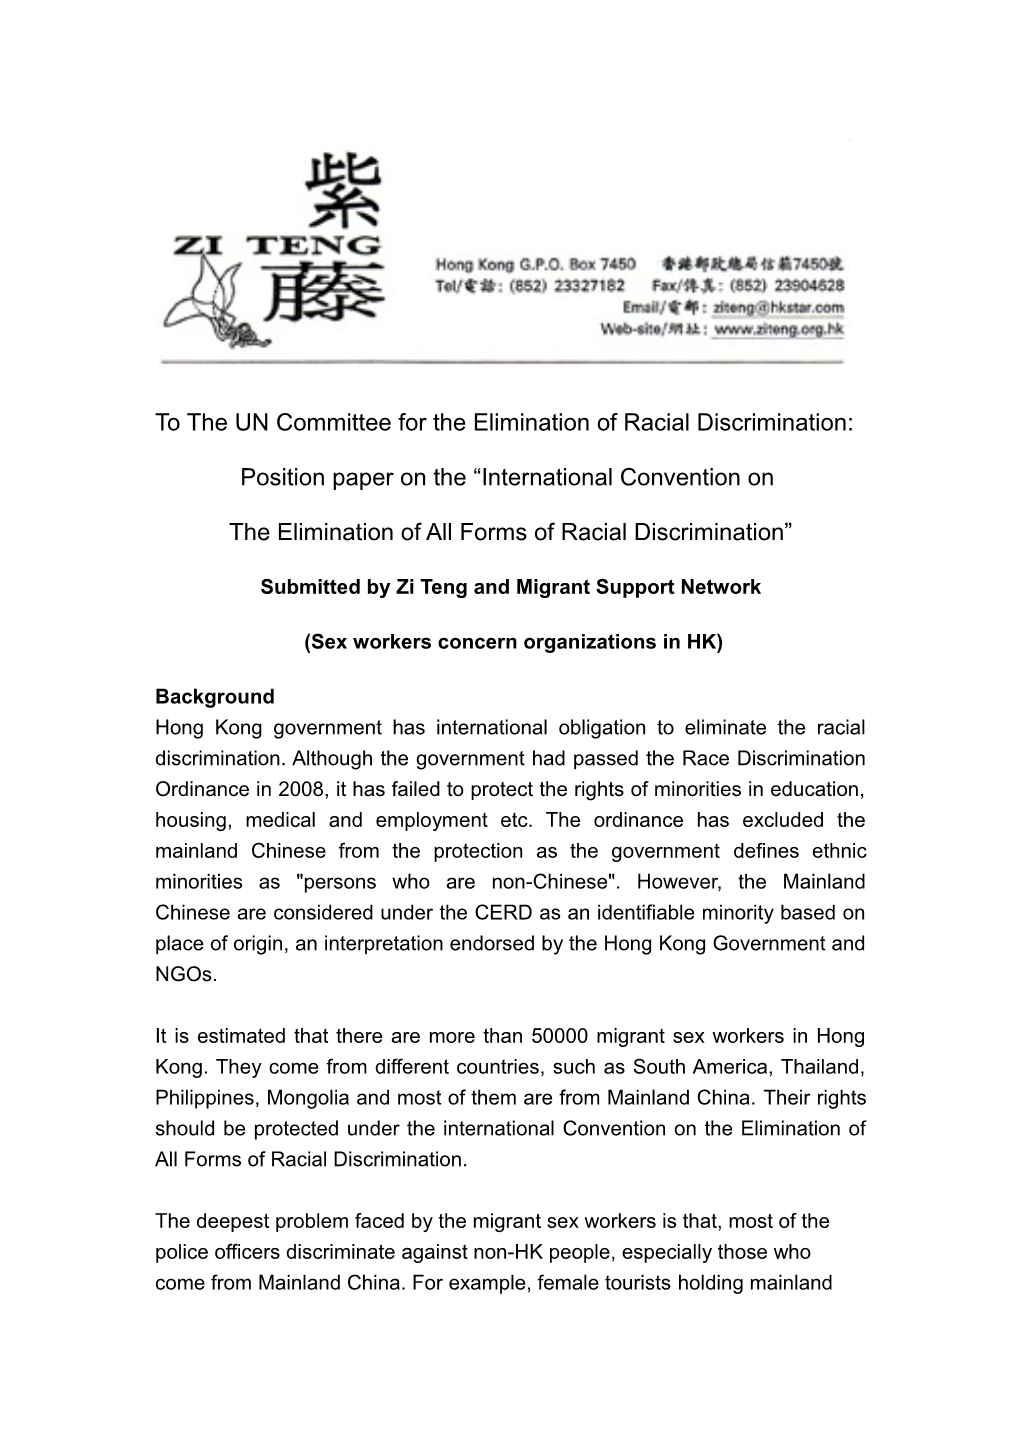 To the Committee for the Elimination of Racial Discrimination of UN